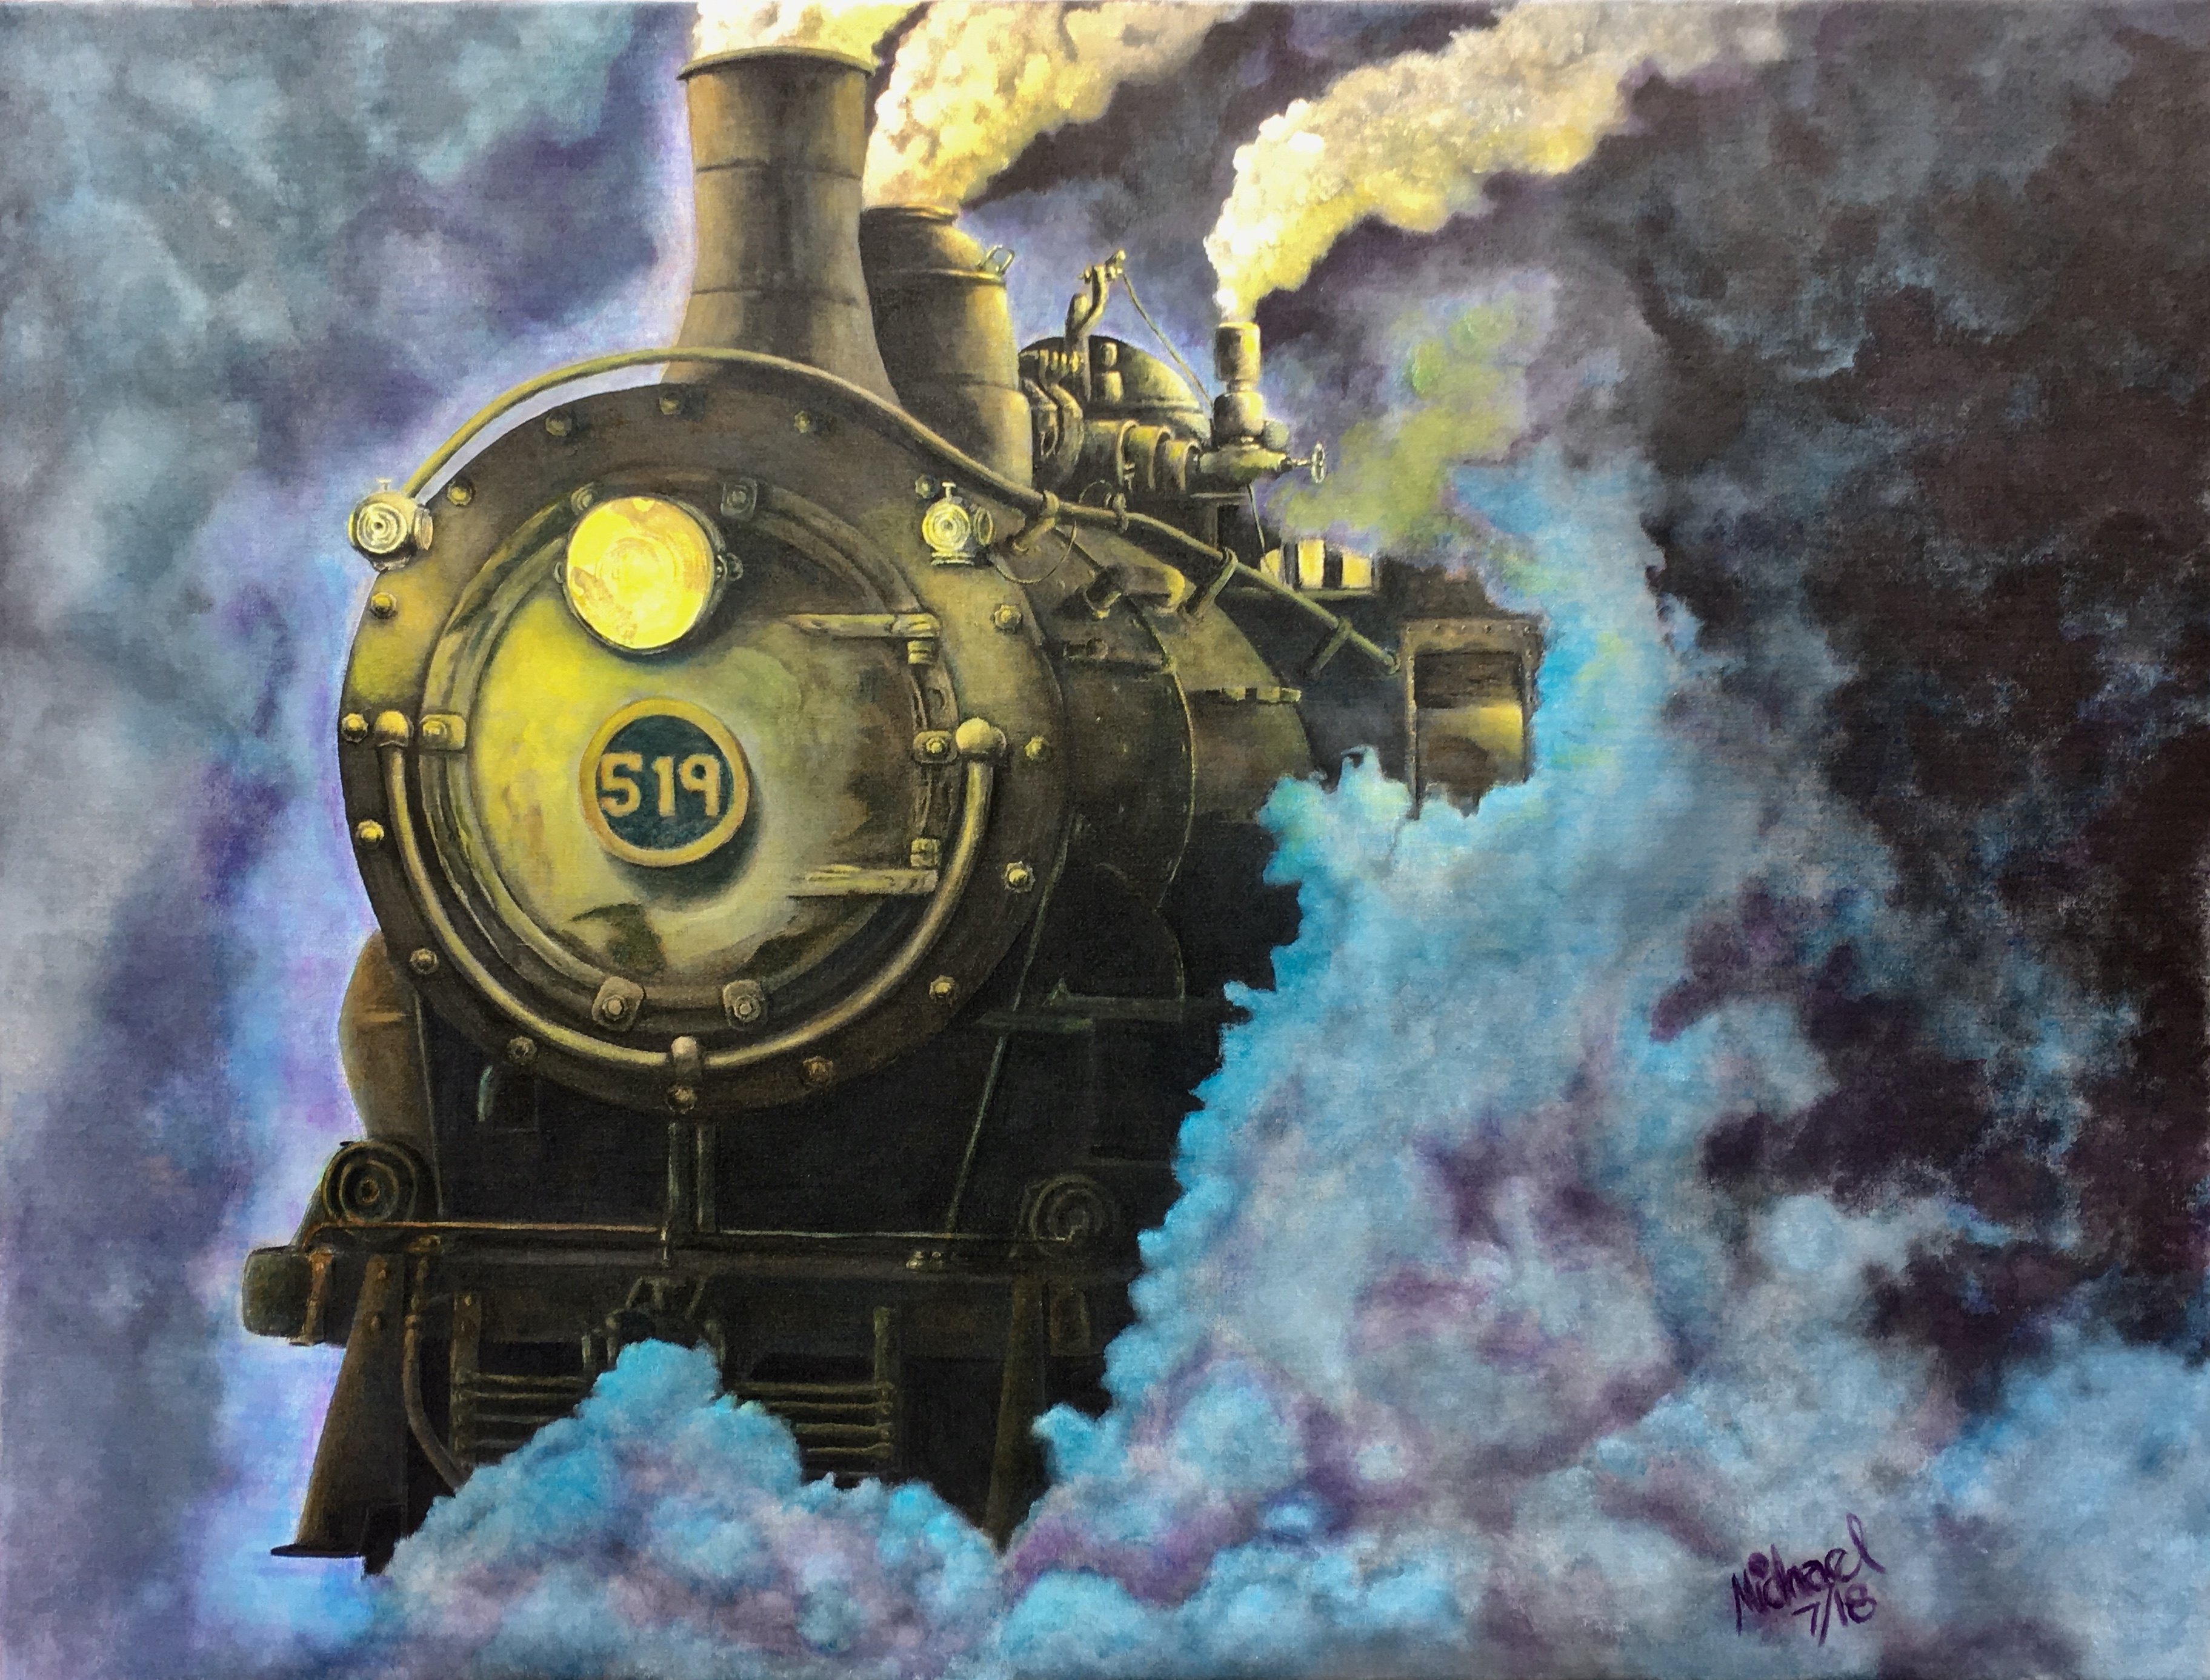 Steam engine 519 painting by Michael Arnold